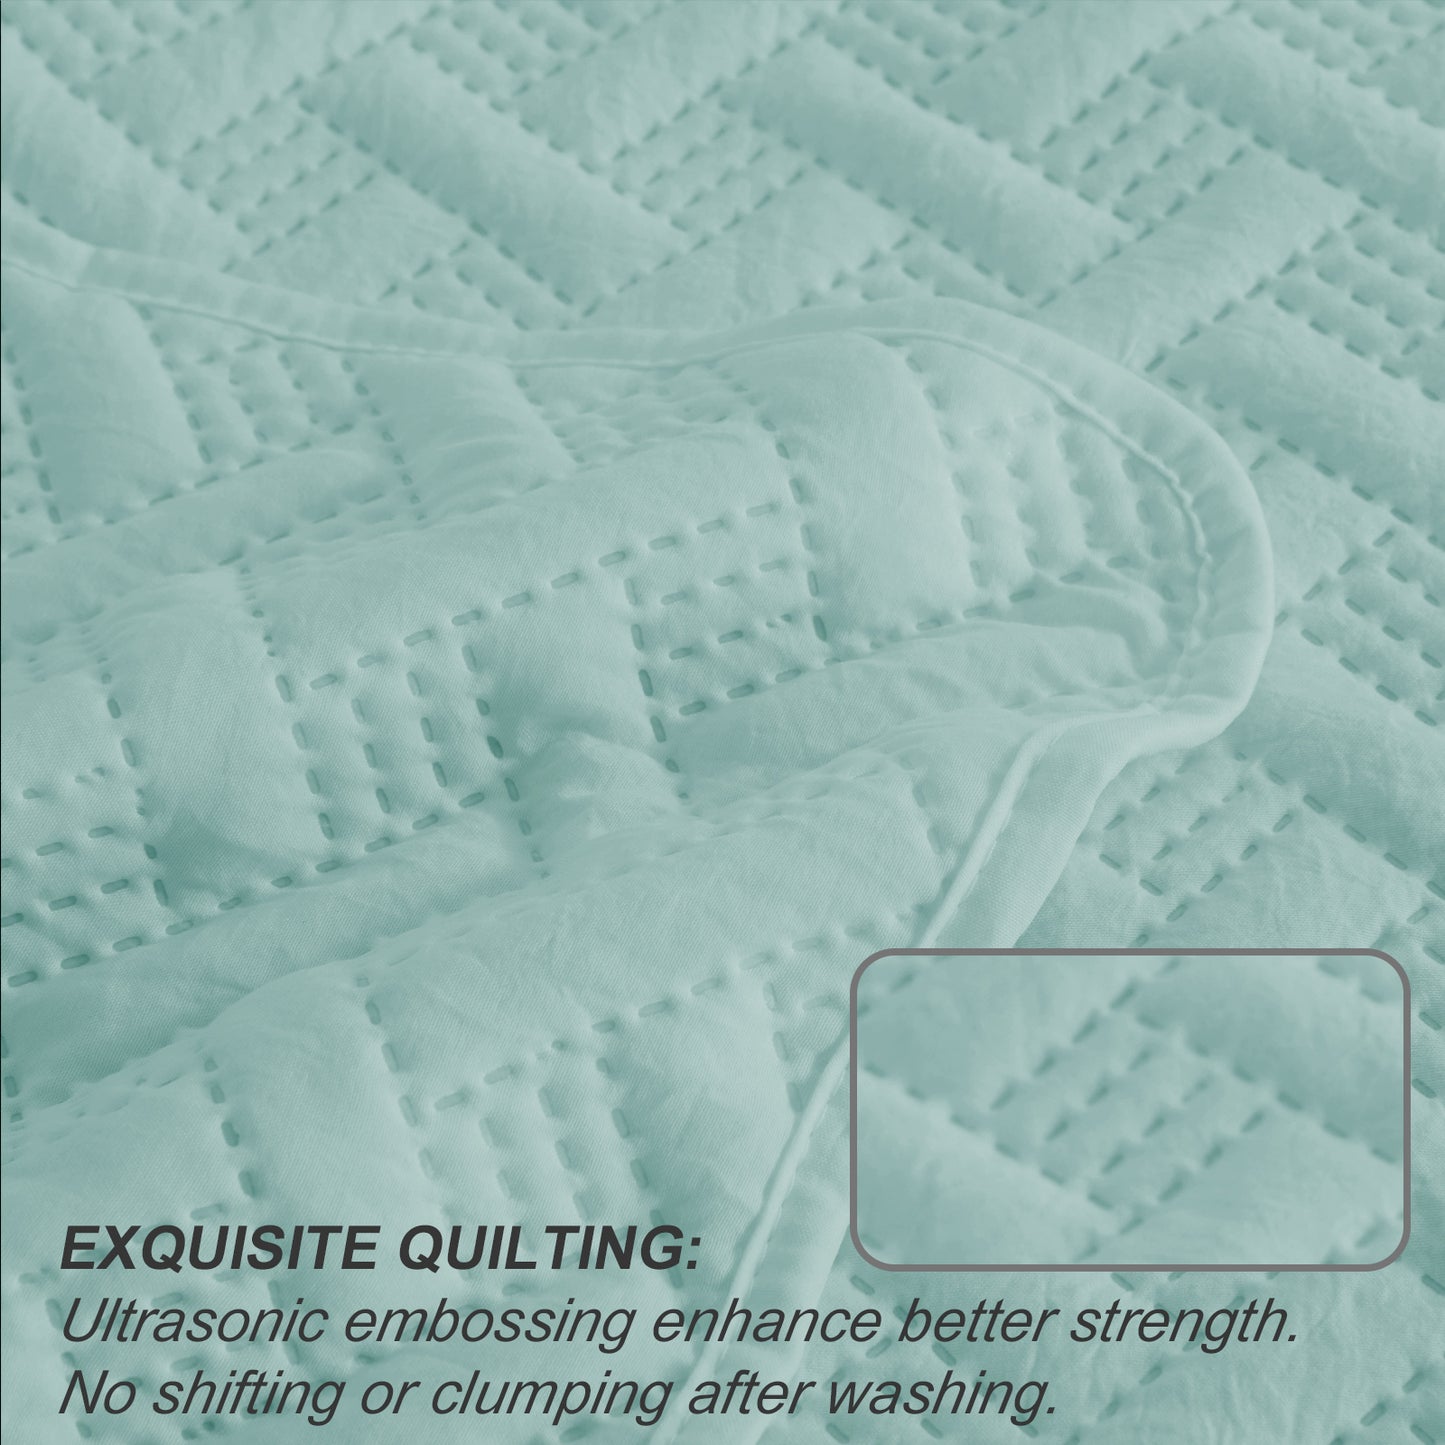 Exclusivo Mezcla 2-Piece Aqua Twin Size Quilt Set, Weave Pattern Ultrasonic Lightweight and Soft Quilts/Bedspreads/Coverlets/Bedding Set (1 Quilt, 1 Pillow Sham) for All Seasons